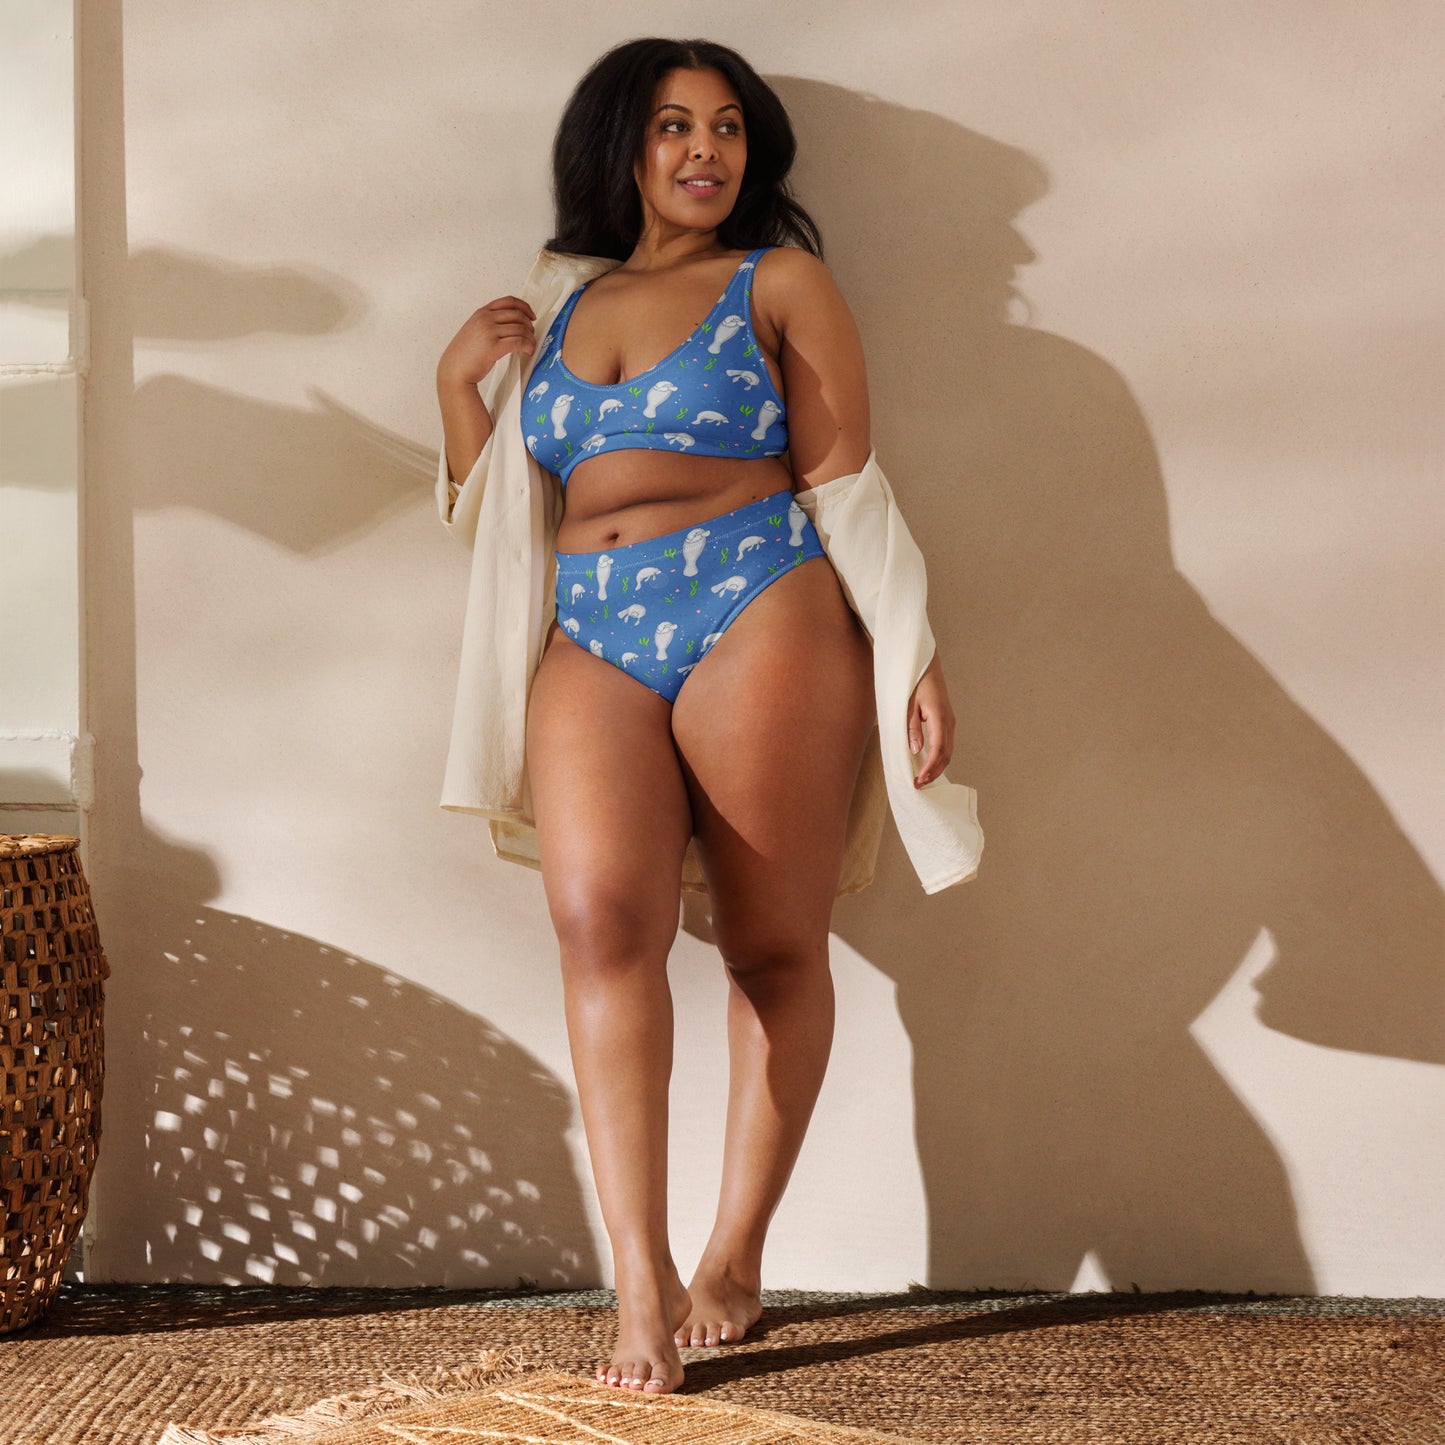 High-waisted bikini with hand-illustrated manatee pattern on a blue background. Made from recycled polyester combined with stretchable fabric. Has double layers and removable pads. Front view shown on female model leaning against a wall.